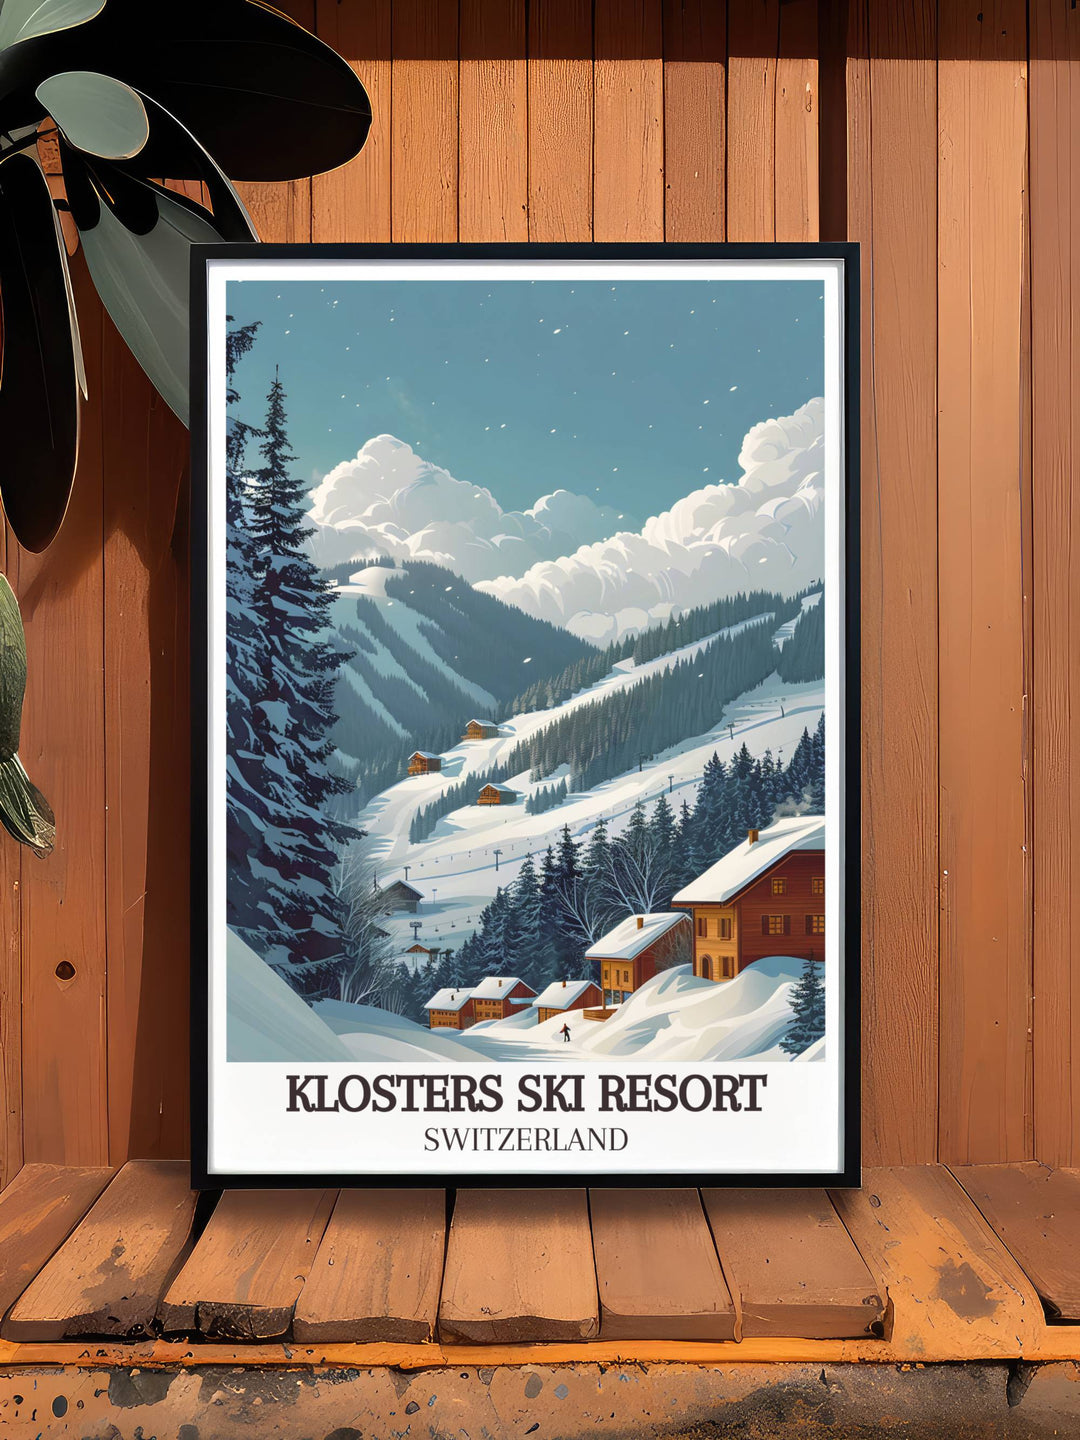 Elevate your home decor with our Klosters Ski Resort Travel Poster. This Ski Resort Poster showcases the breathtaking scenery and vibrant skiing culture of Klosters making it a must have for anyone who loves winter adventures and timeless artwork